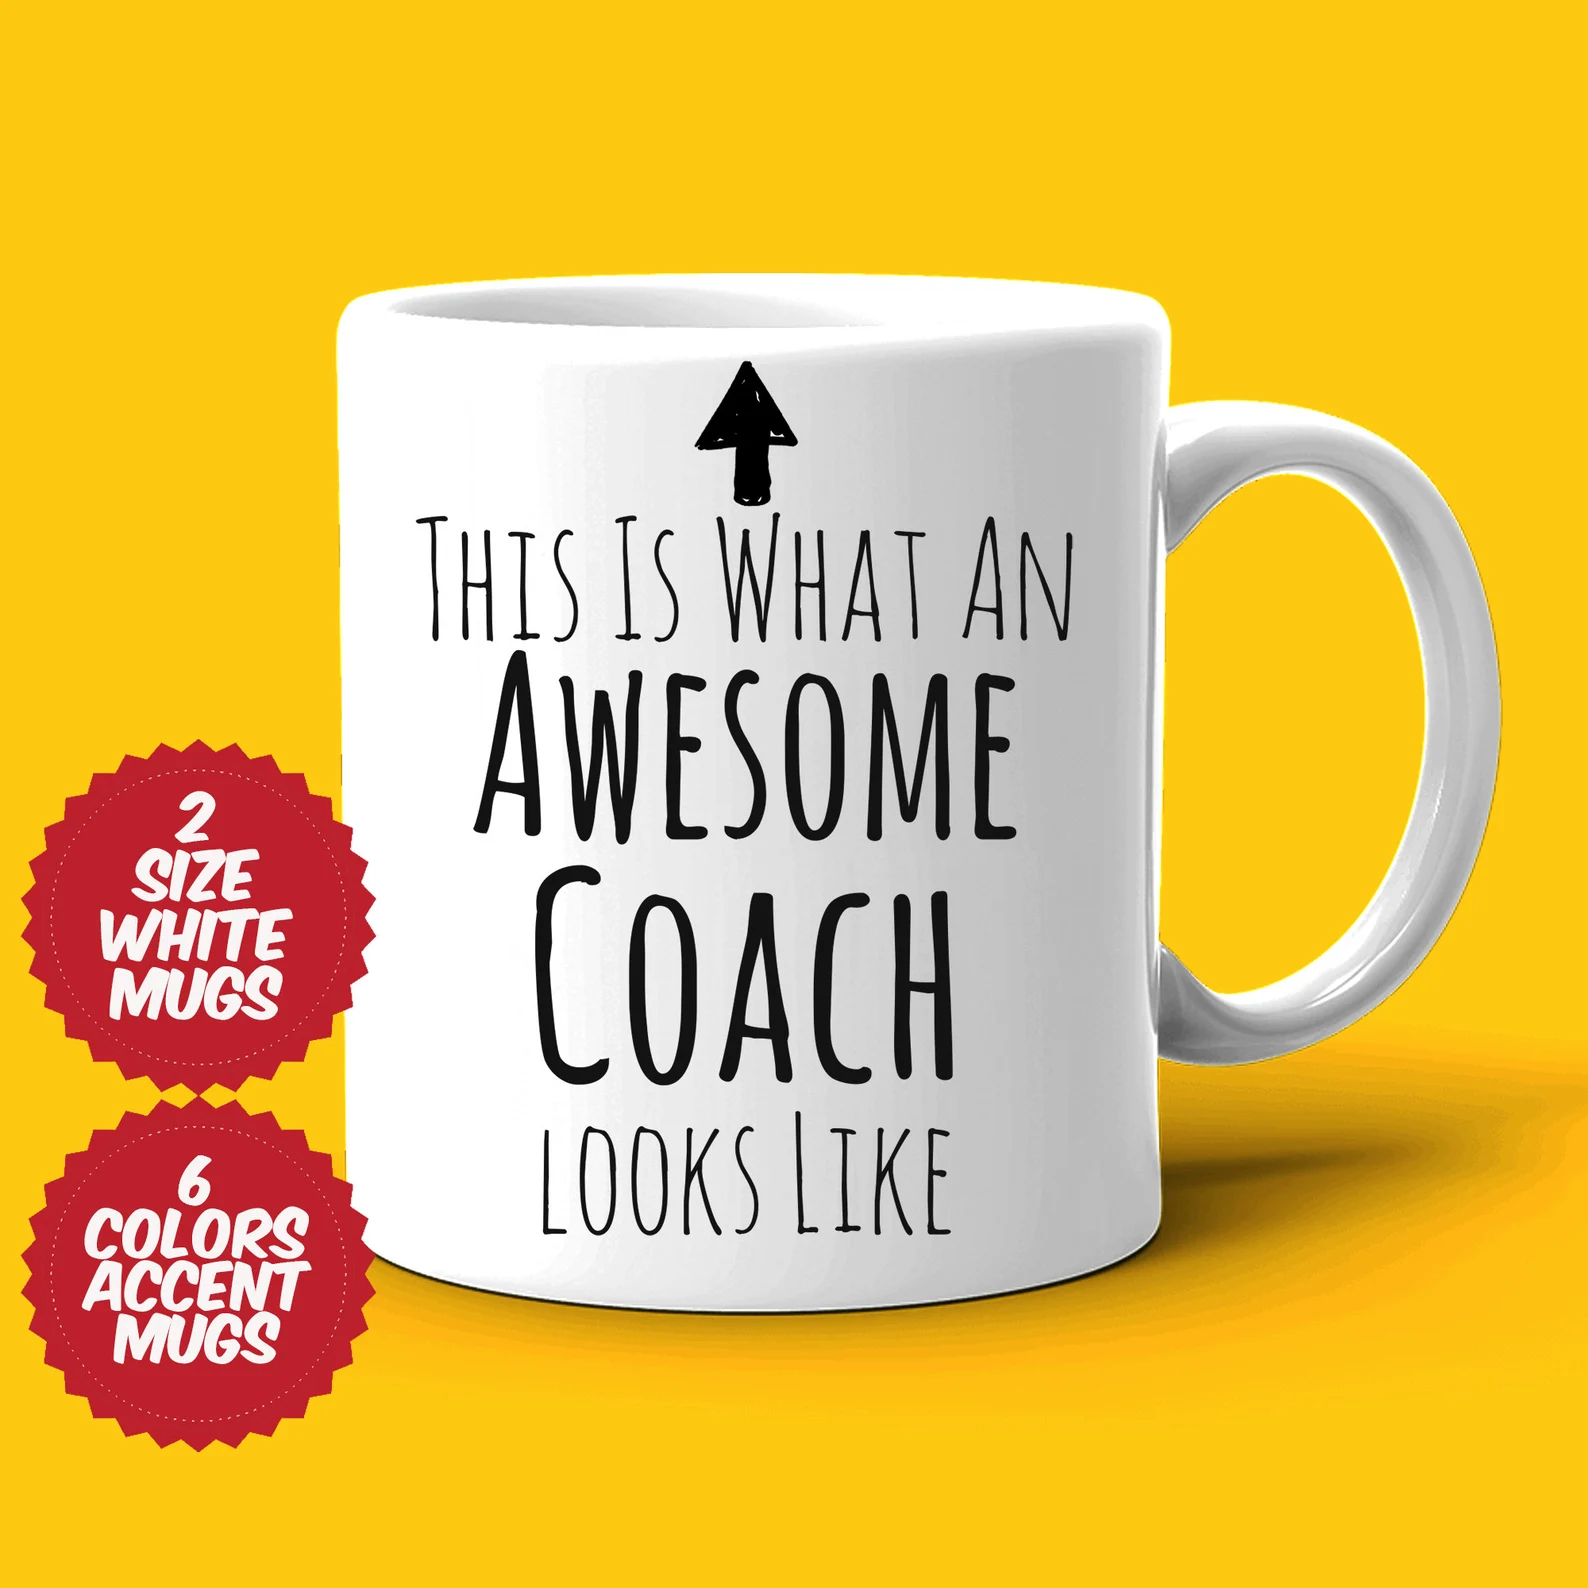 After a long day (and a long season), give your coach some positive reinforcement with a thoughtful gift.